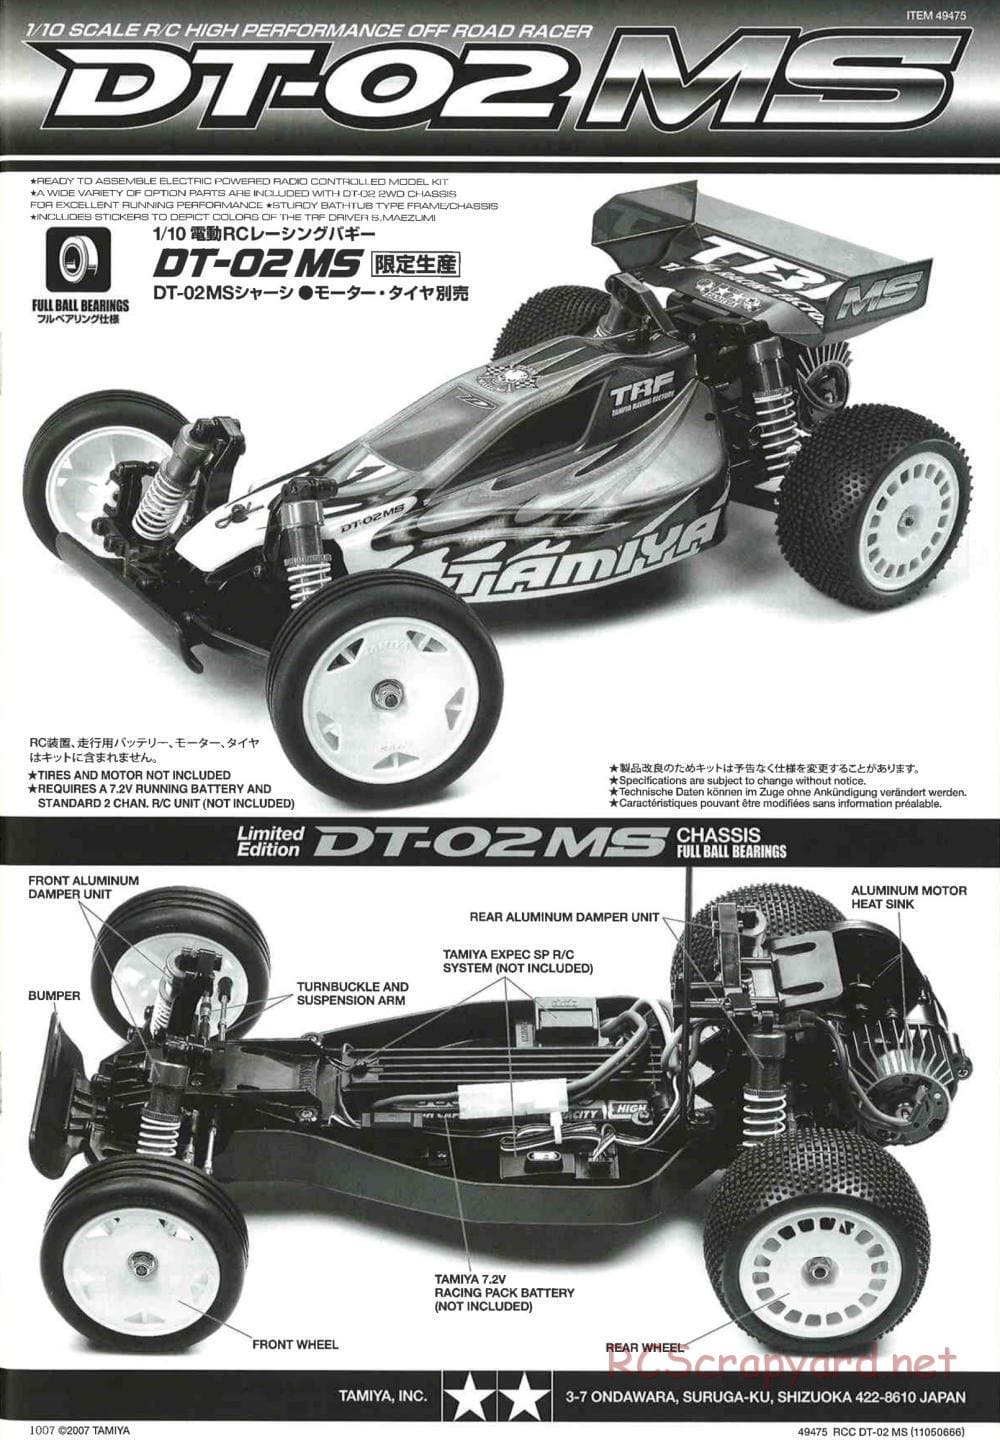 Tamiya - DT-02 MS Chassis - Manual - Page 1